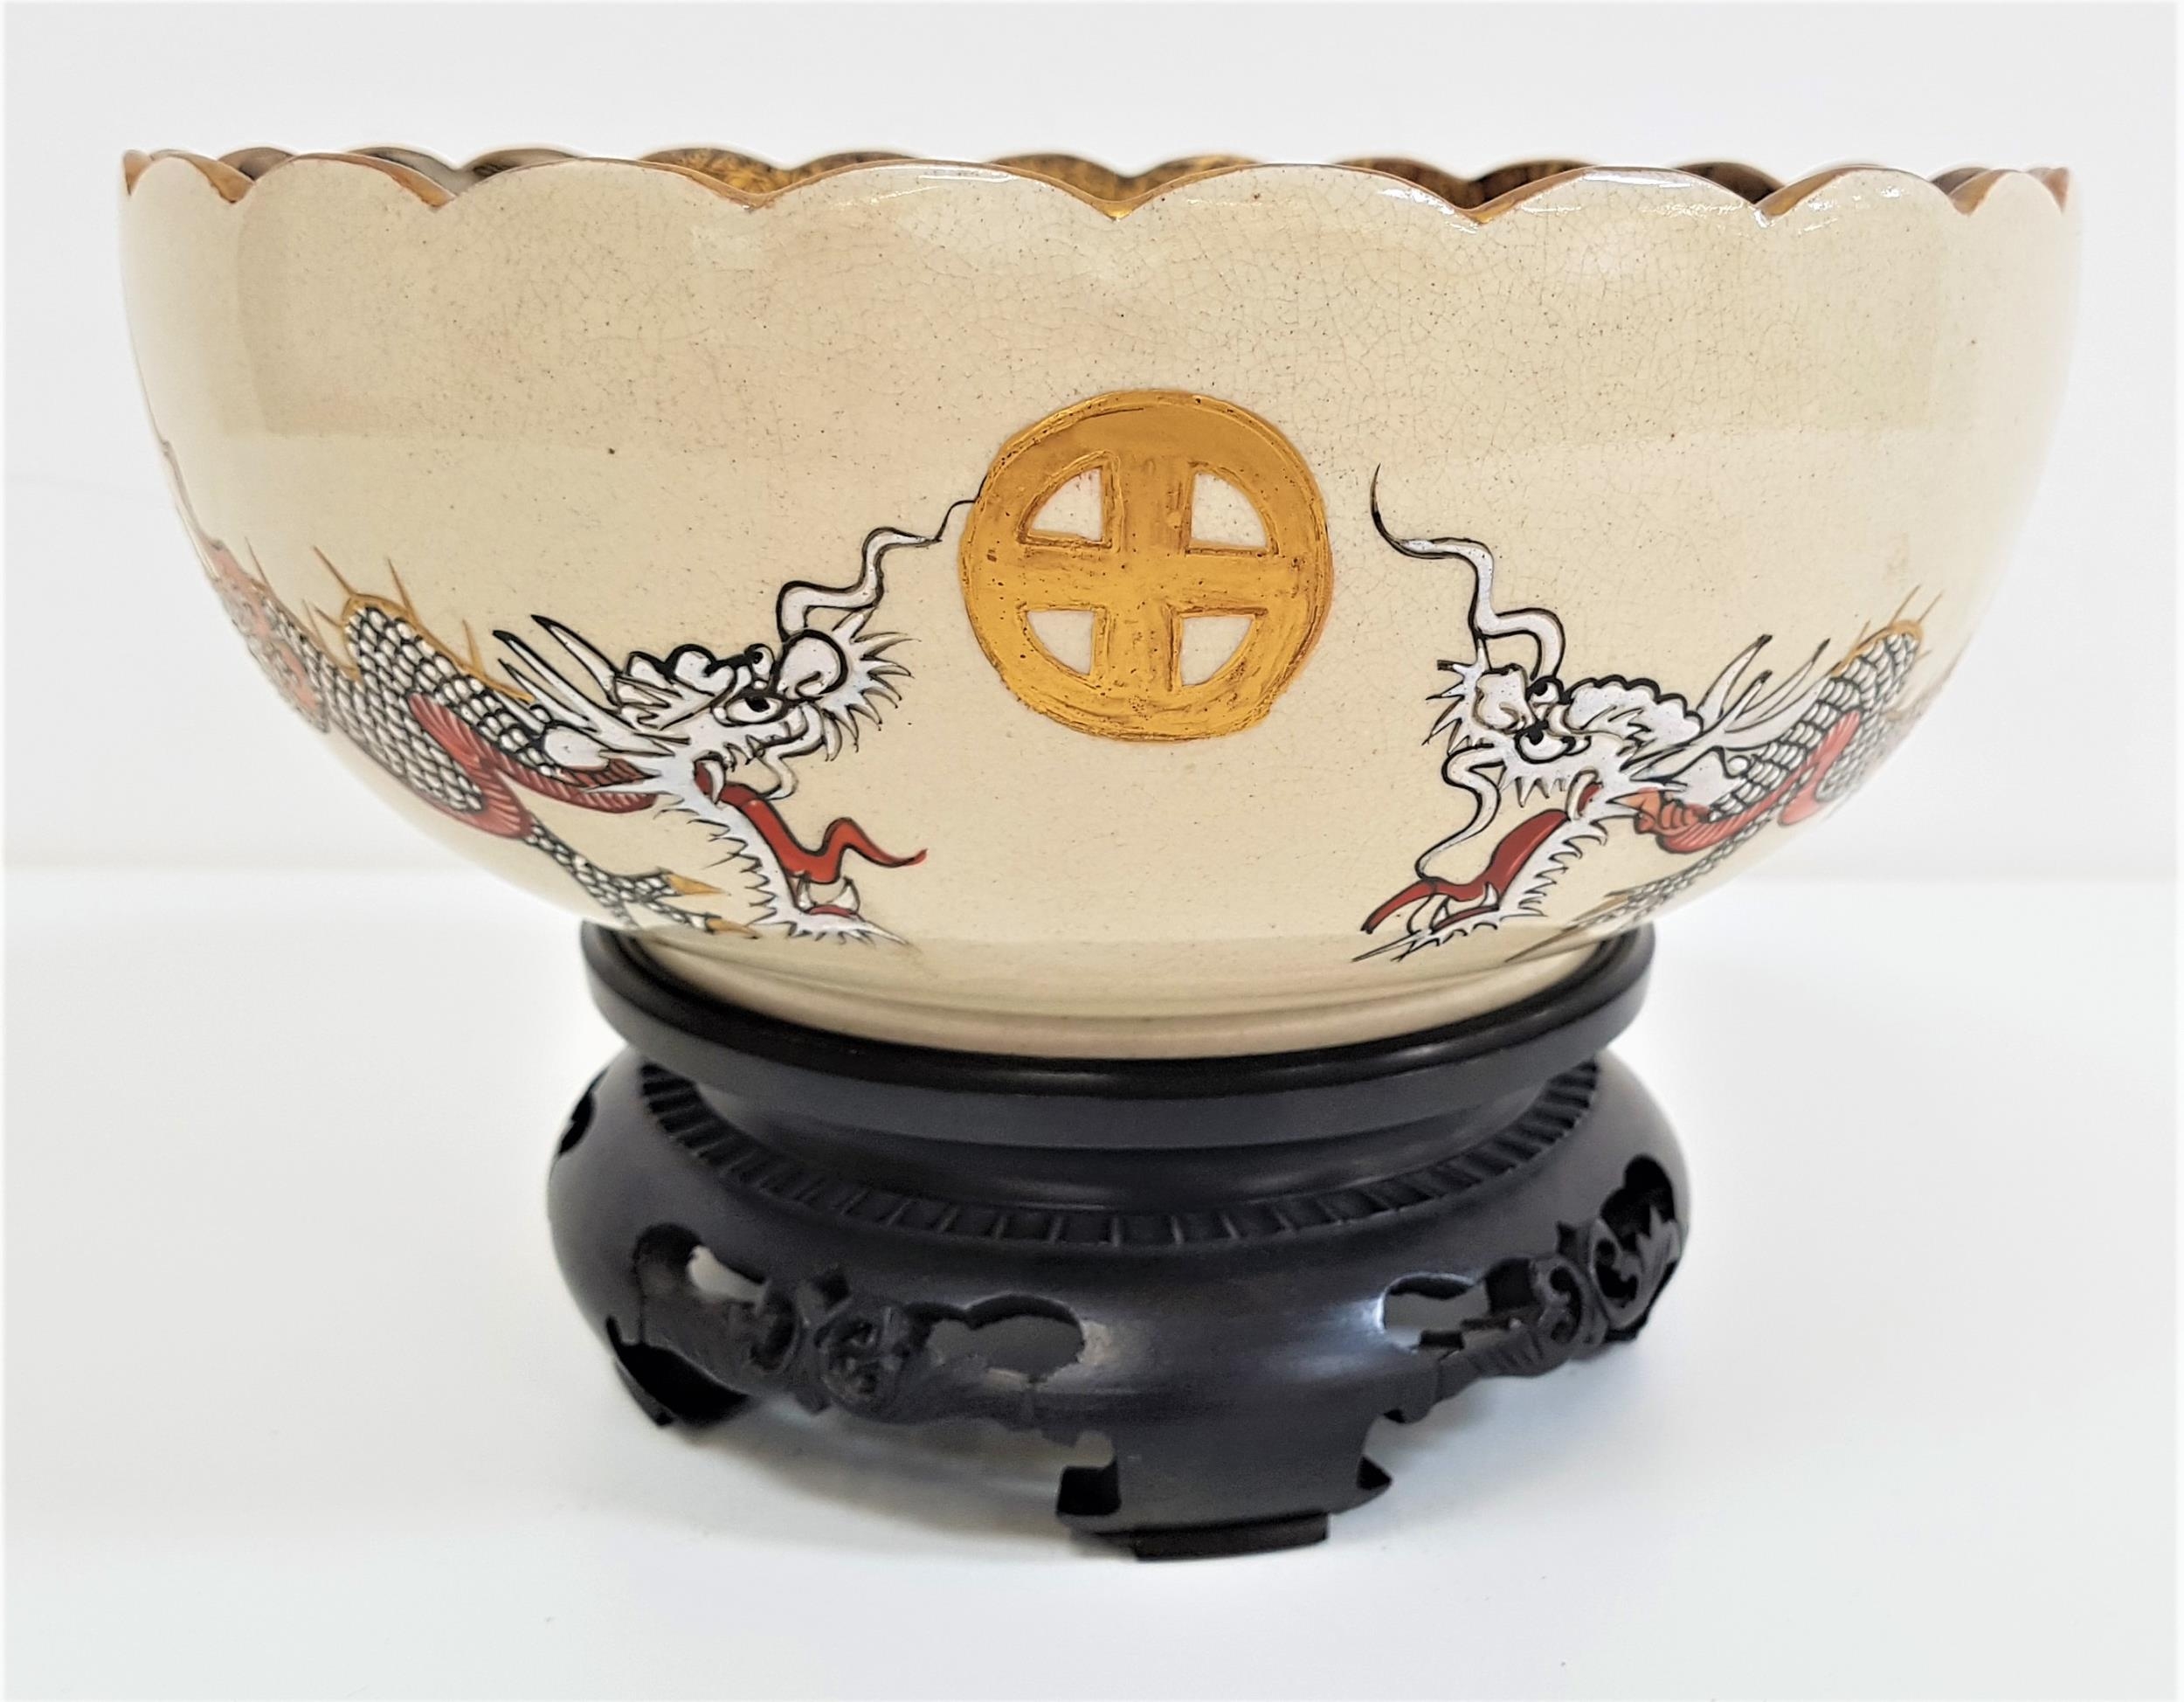 JAPANESE SATSUMA BOWL with a scalloped gilt edge rim, the bowl decorated with two dragons and many